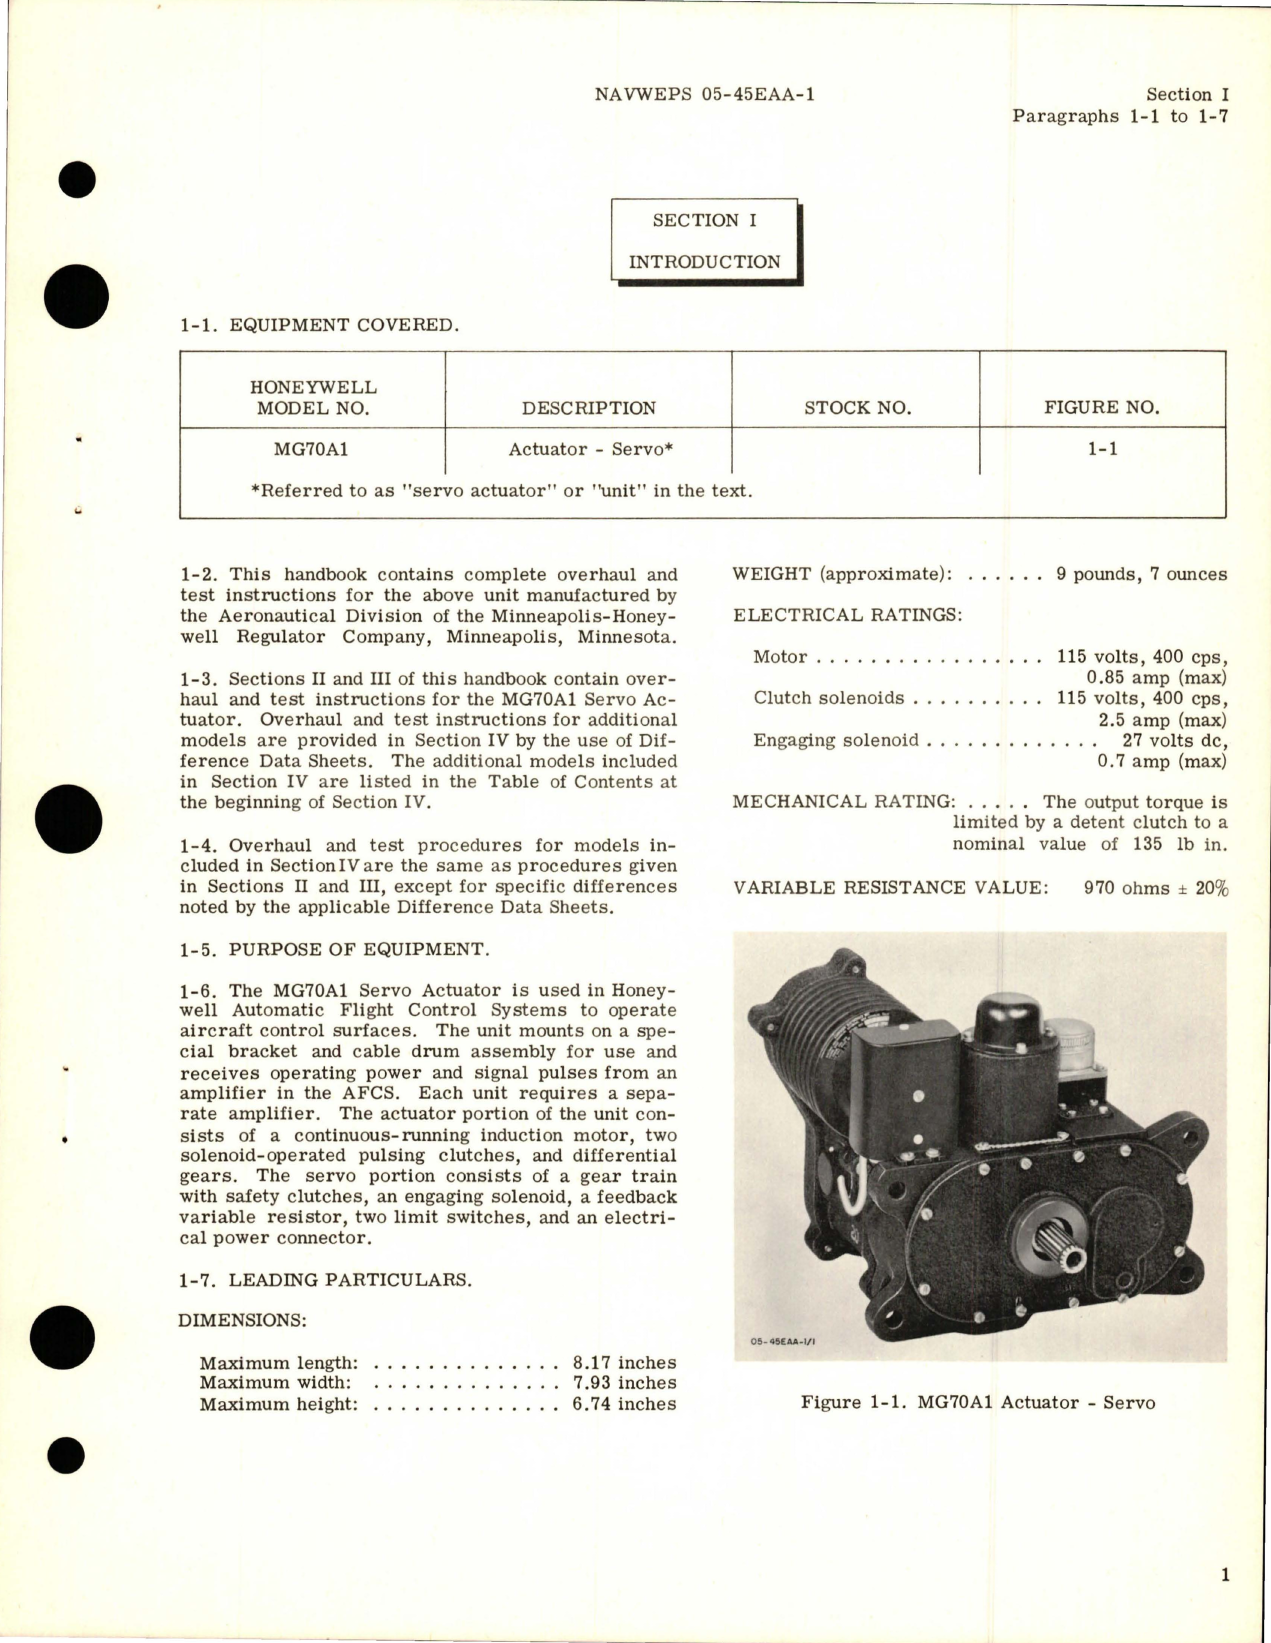 Sample page 5 from AirCorps Library document: Overhaul Instructions for Servo Actuator - Parts MG70A1, MG70A2, MG70A3, and MG70A4